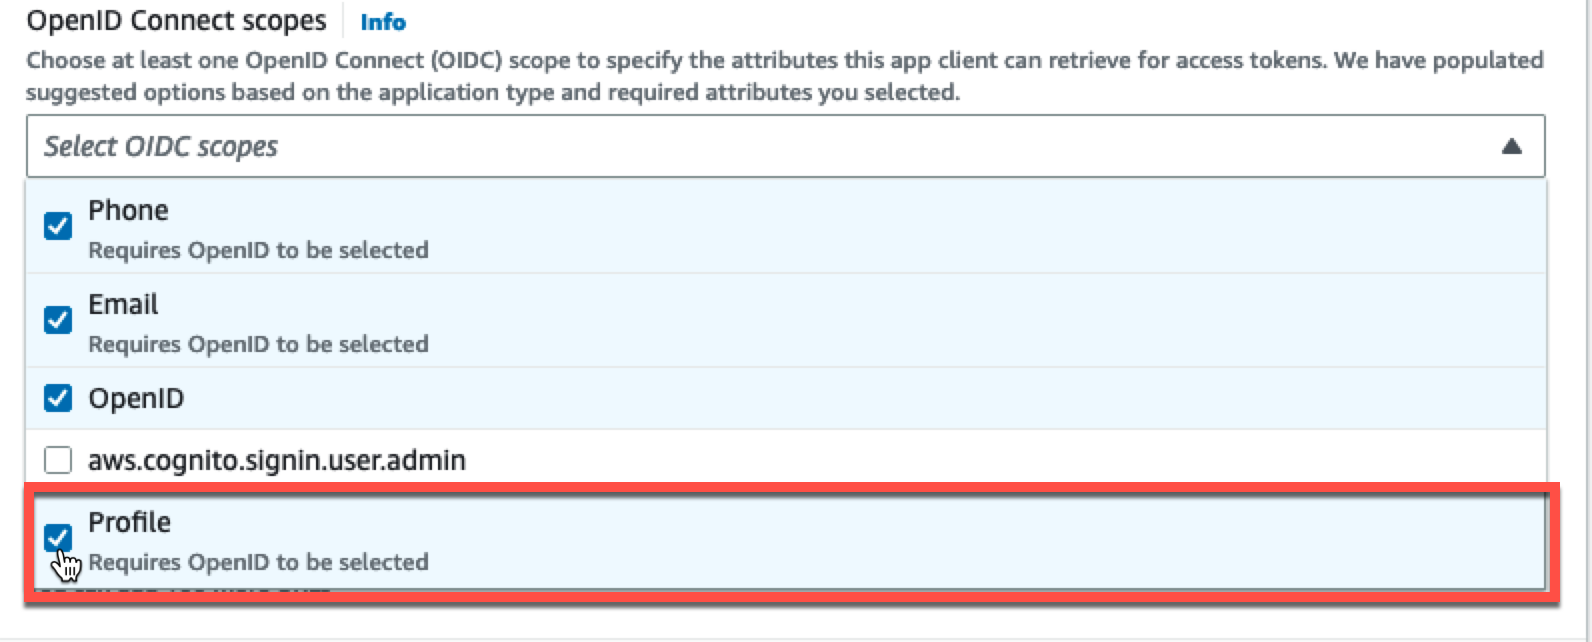 Add the OIDC Profile scope to the client configuration. 